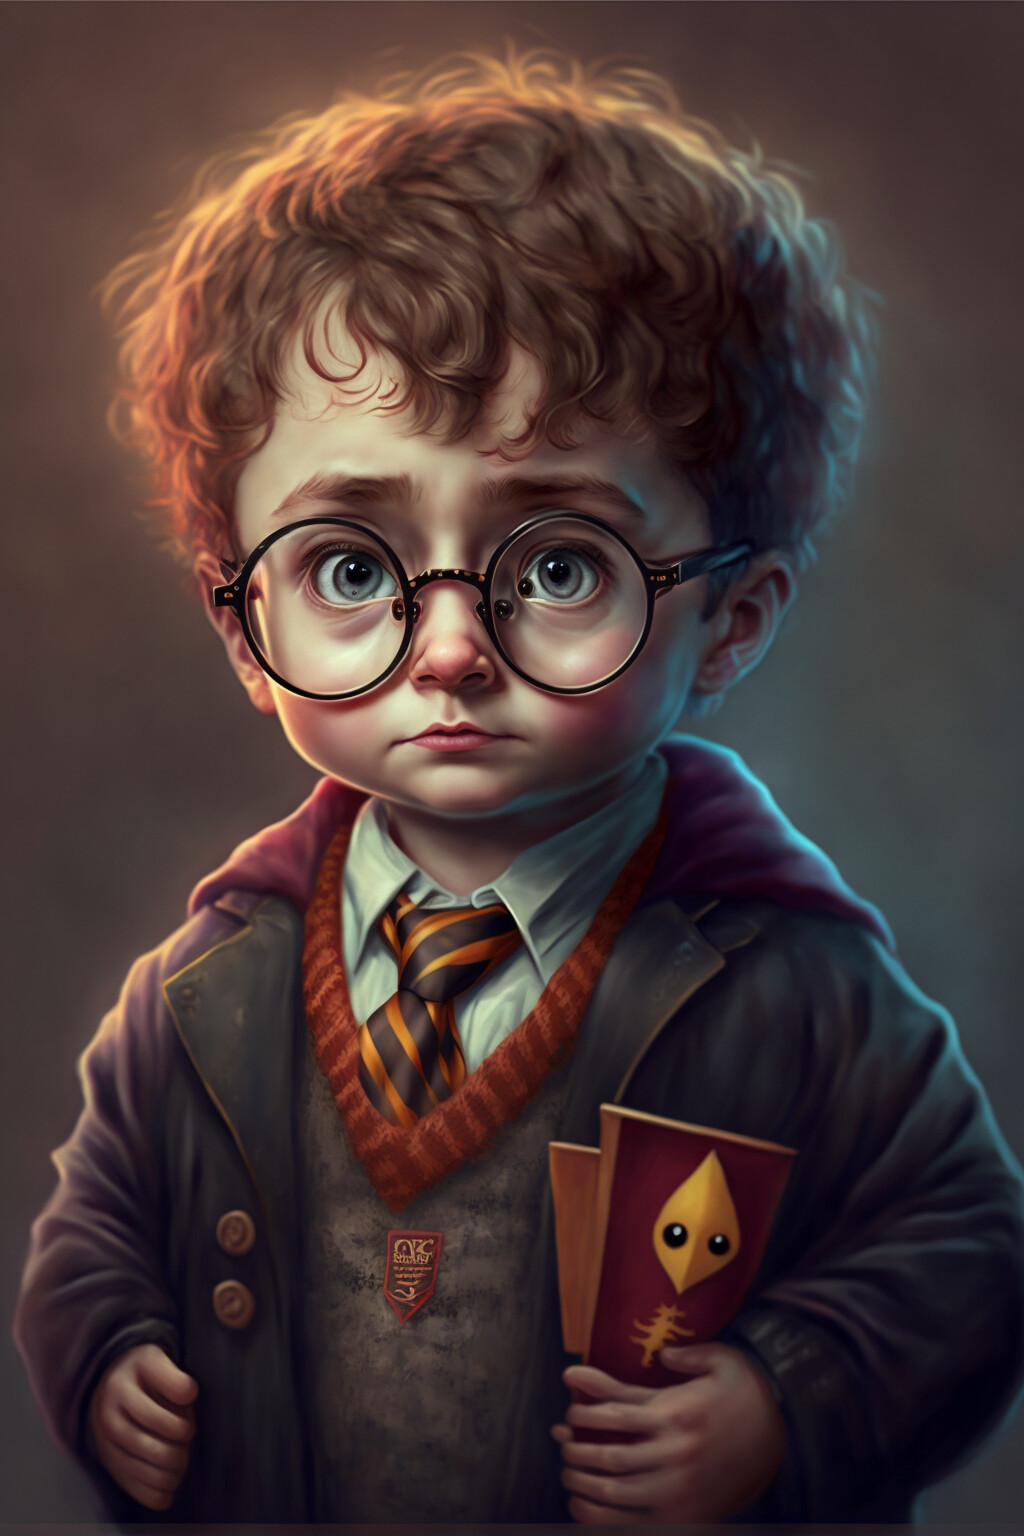 ArtStation - Little and cute Harry Potter characters